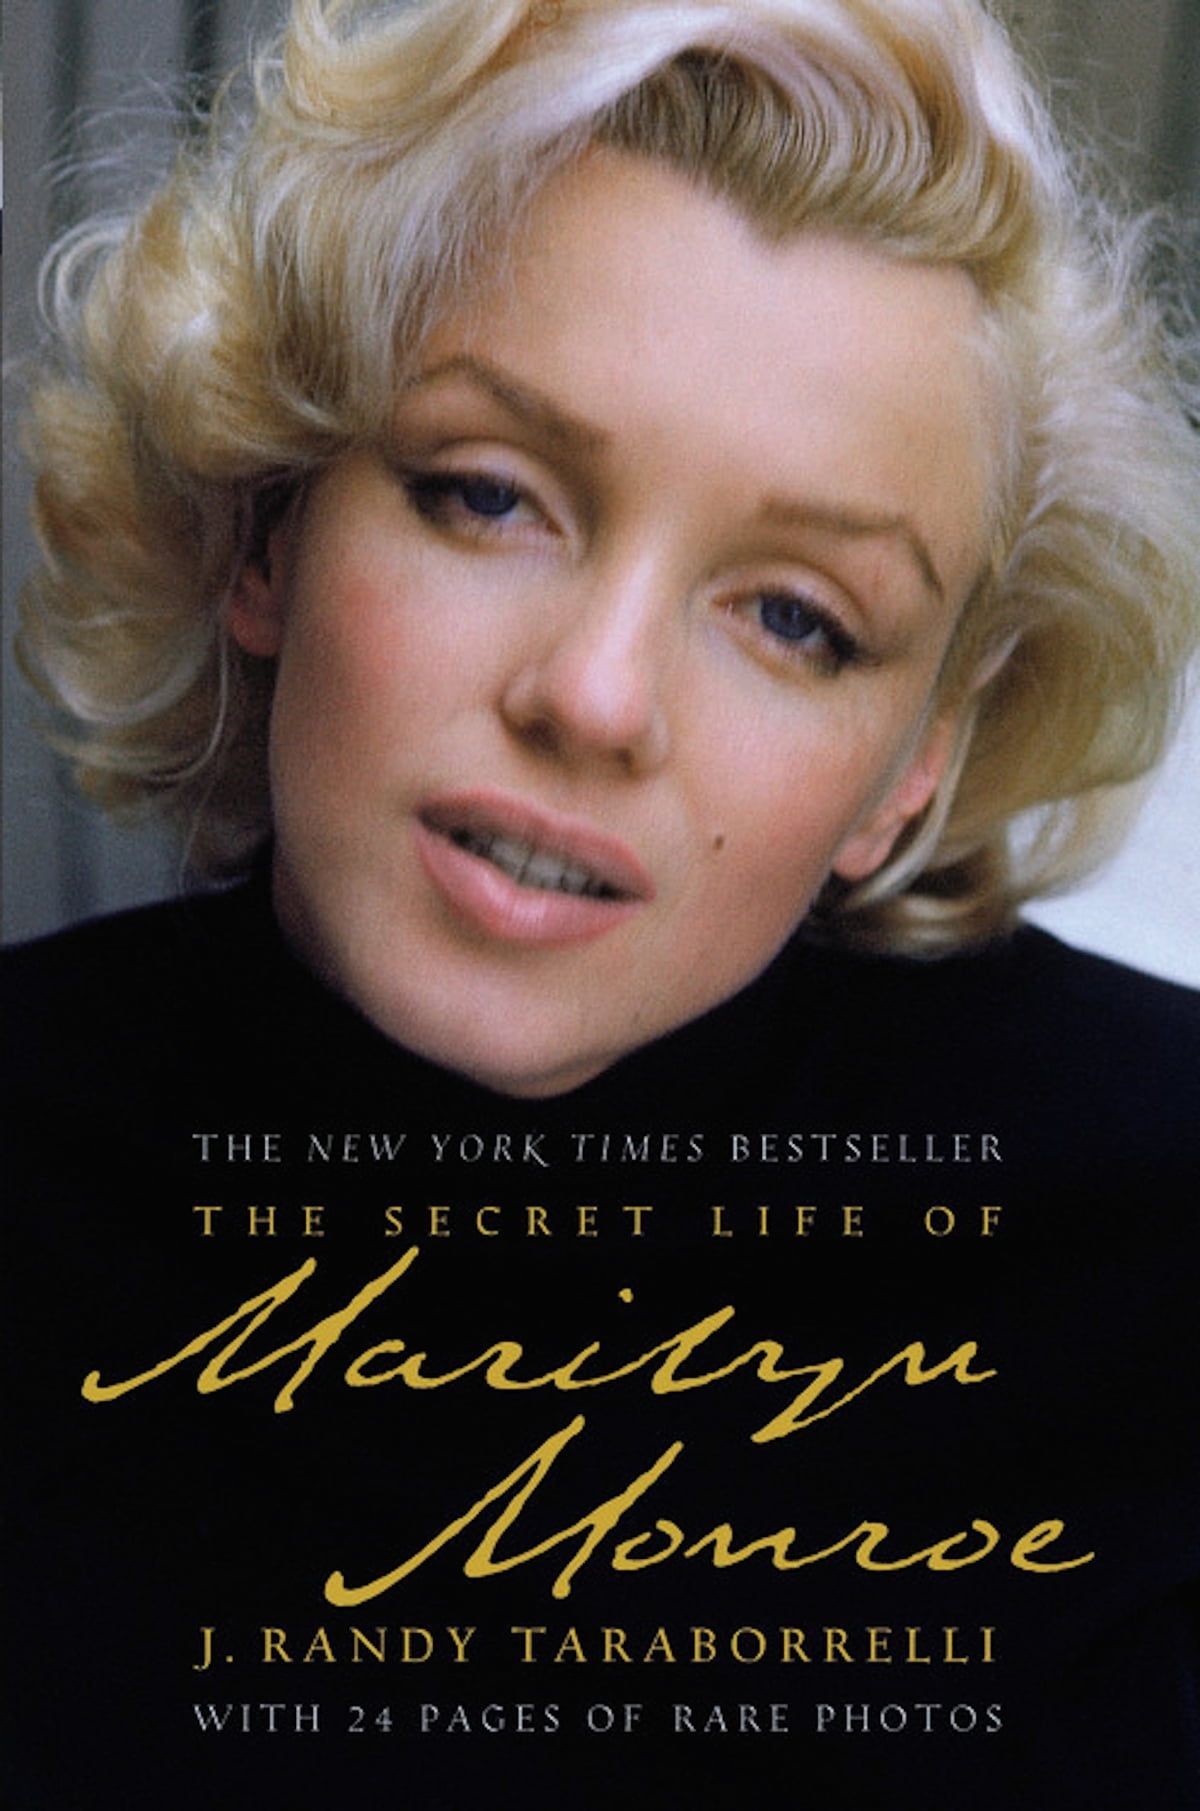 Marilyn Monroe Porn Blowjob - The Best Marilyn Monroe Books to Read After Seeing 'Blonde'